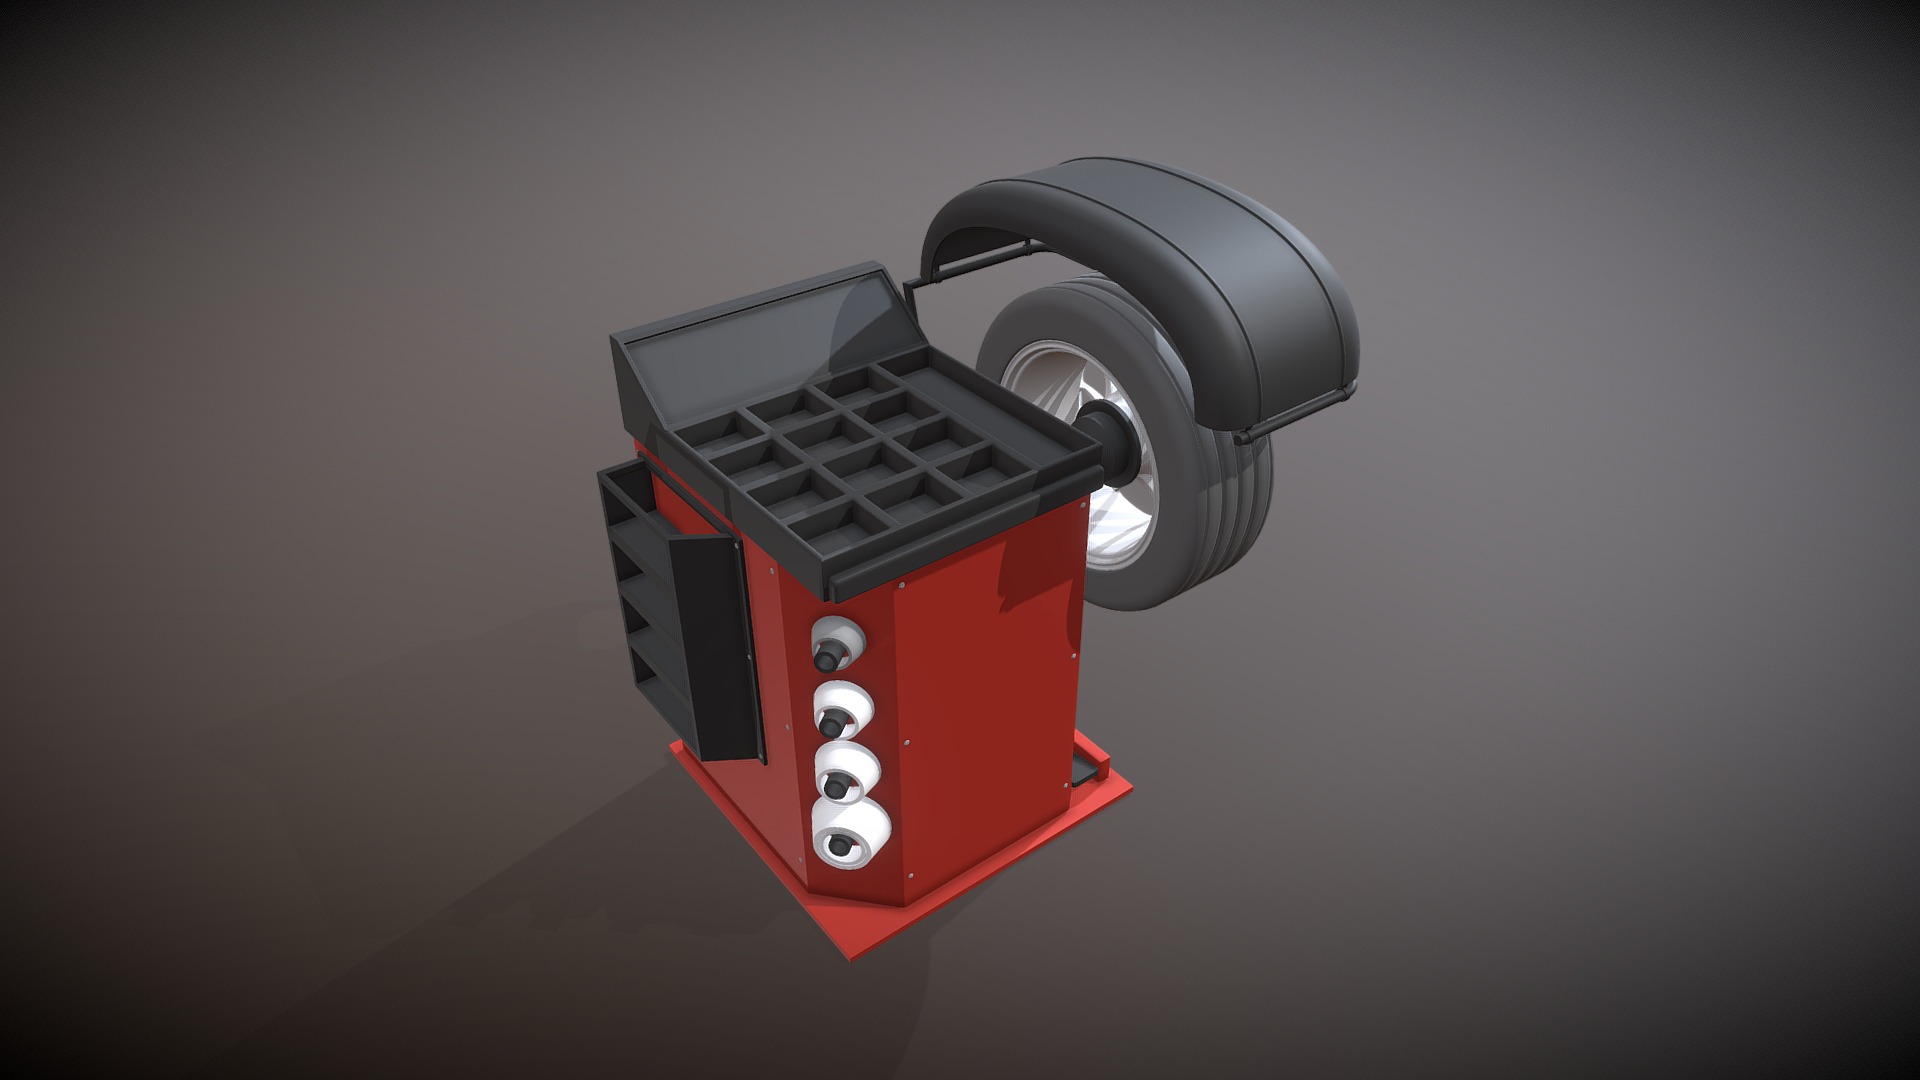 3D model Wheel Balancer Machine - This is a 3D model of the Wheel Balancer Machine. The 3D model is about a red and black fan.